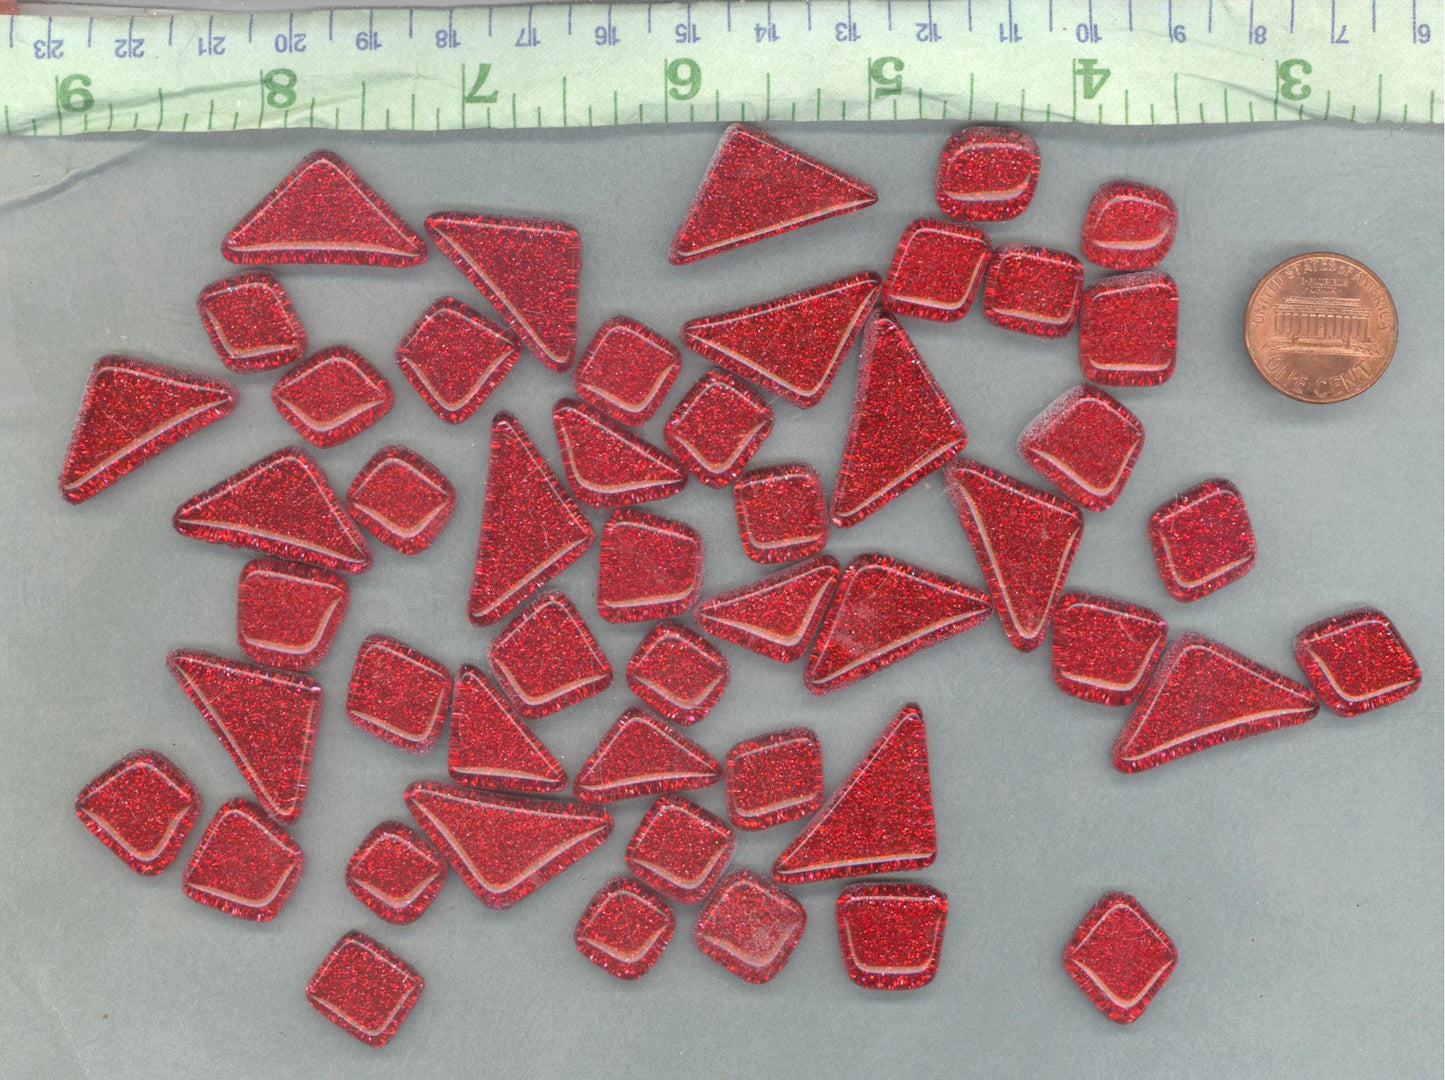 Red Glitter Puzzle Tiles - 100 grams in Assorted Shapes Glass Mosaic Tiles